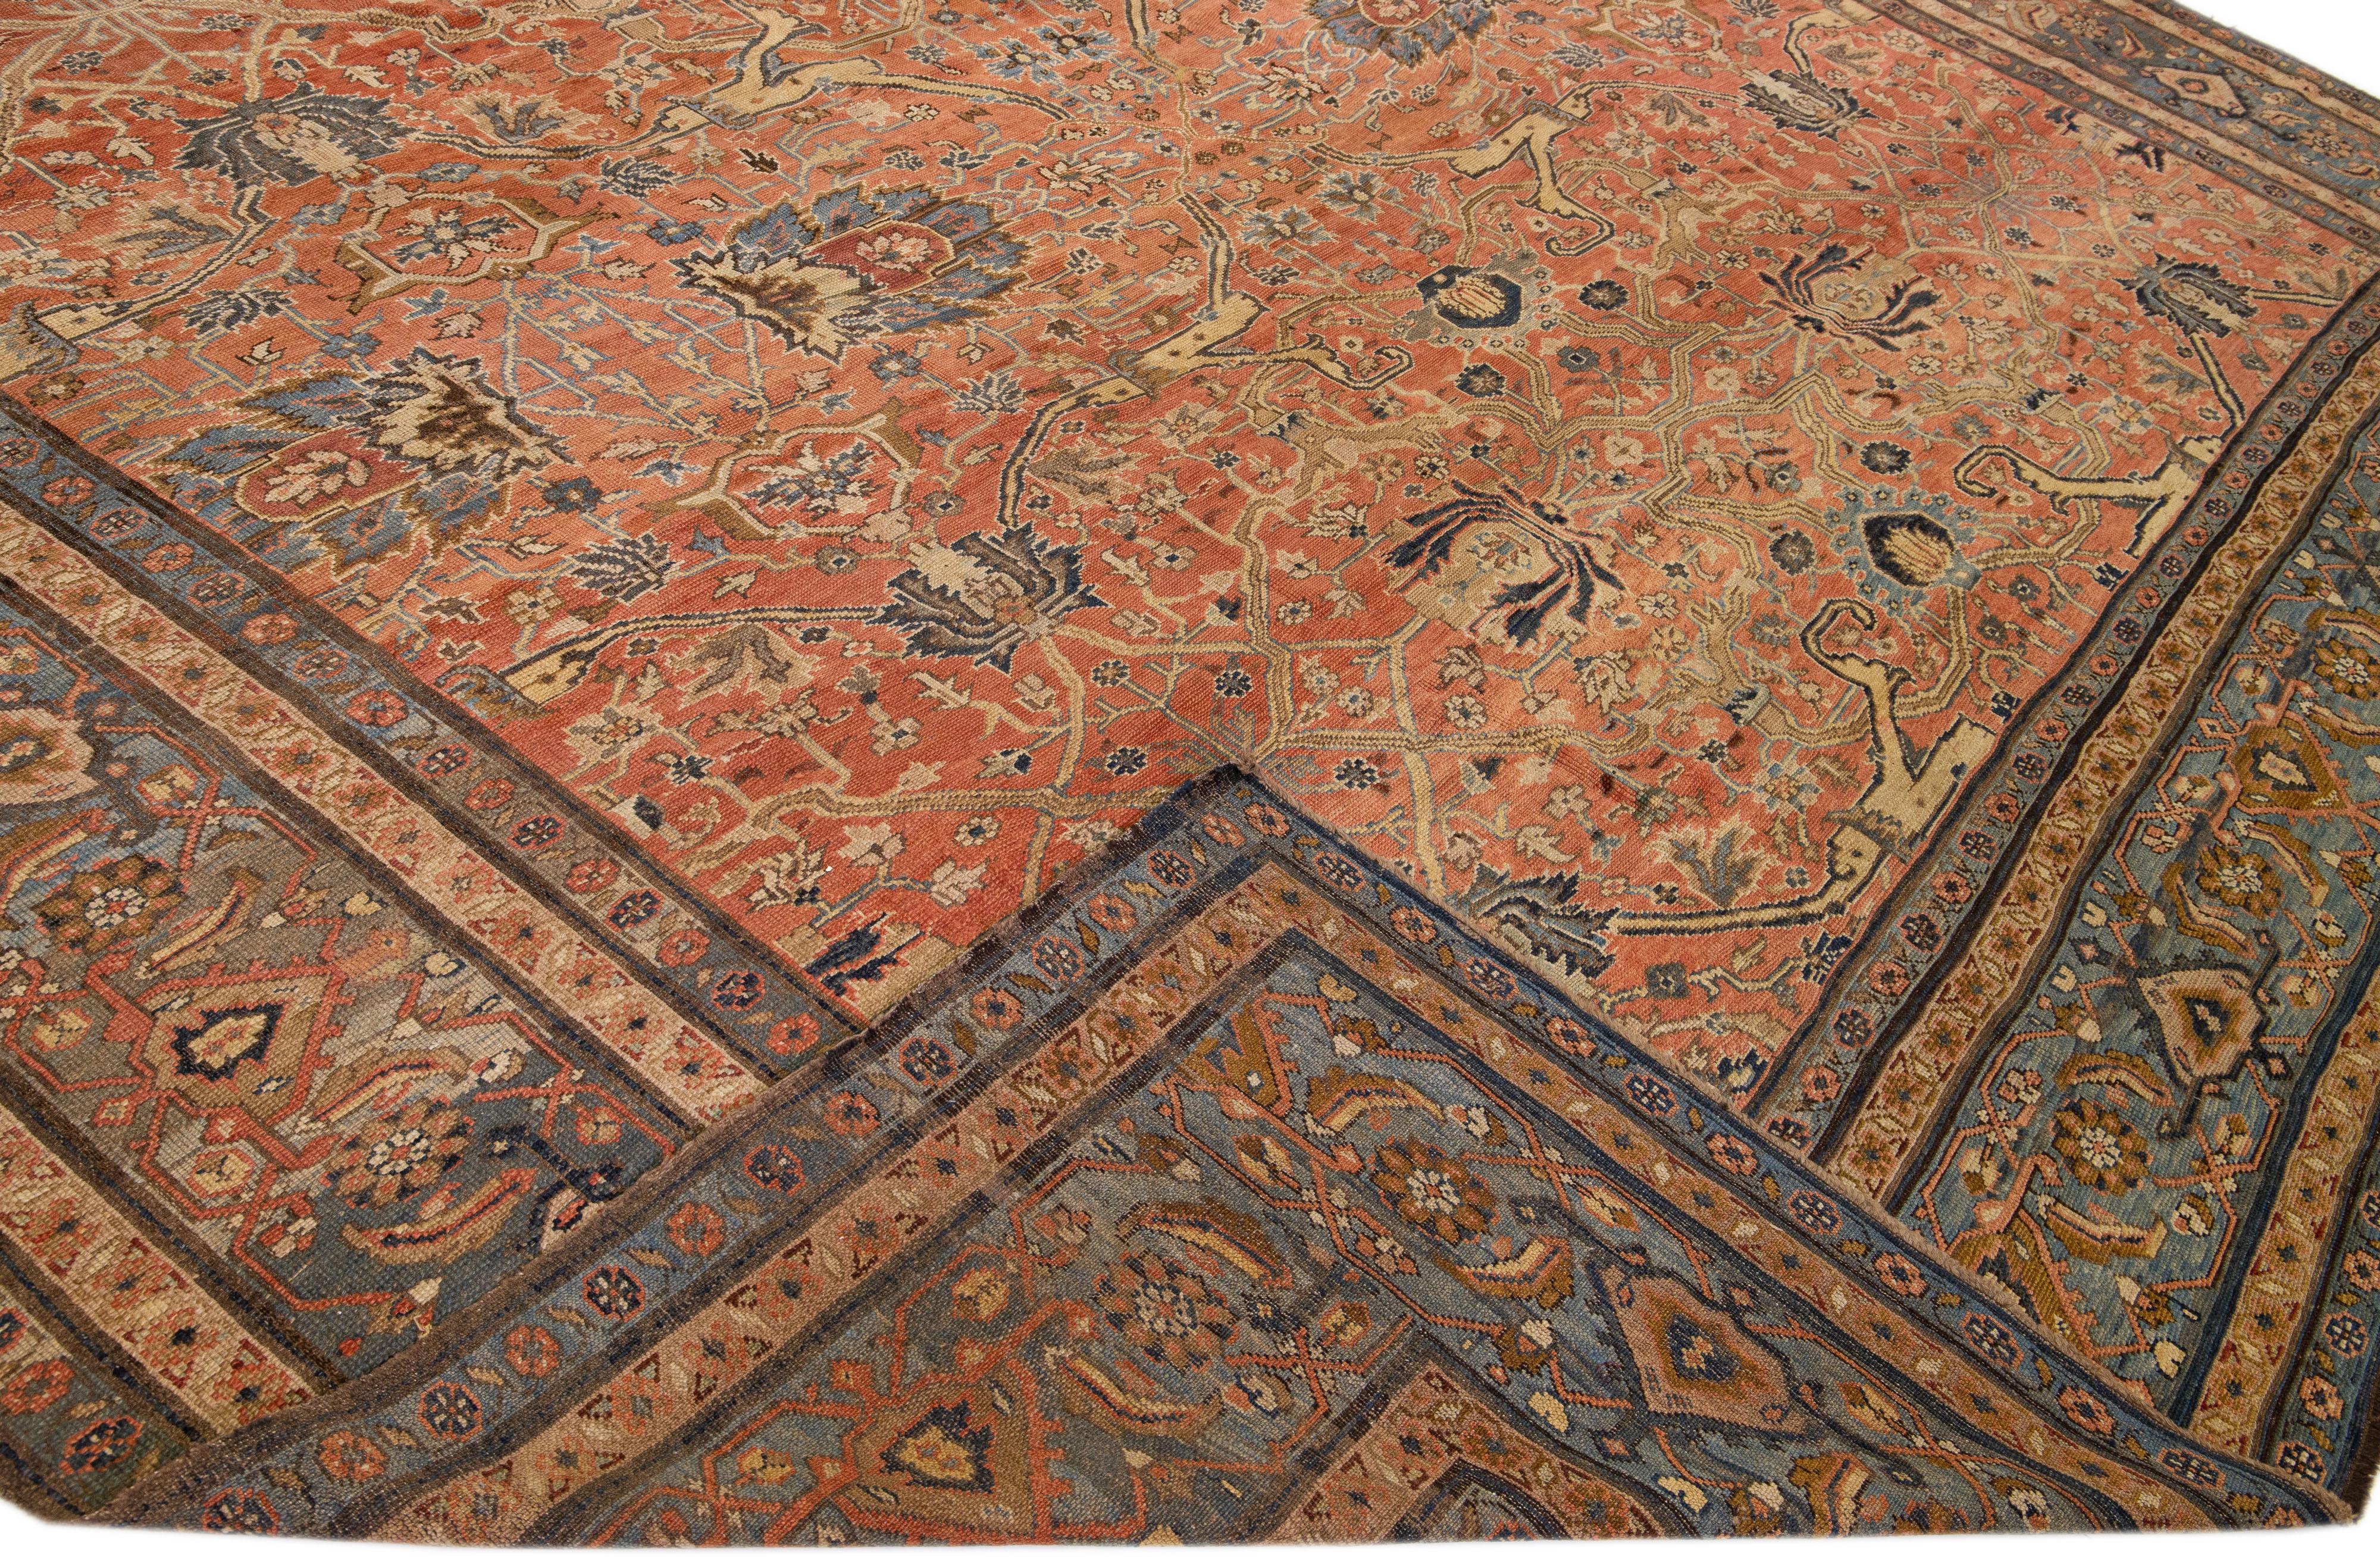 Beautiful antique Bakshaish hand-knotted wool rug with a rust field. This piece has a blue frame and beige accents on a gorgeous Classic all-over floral design.

This rug measures 14'4